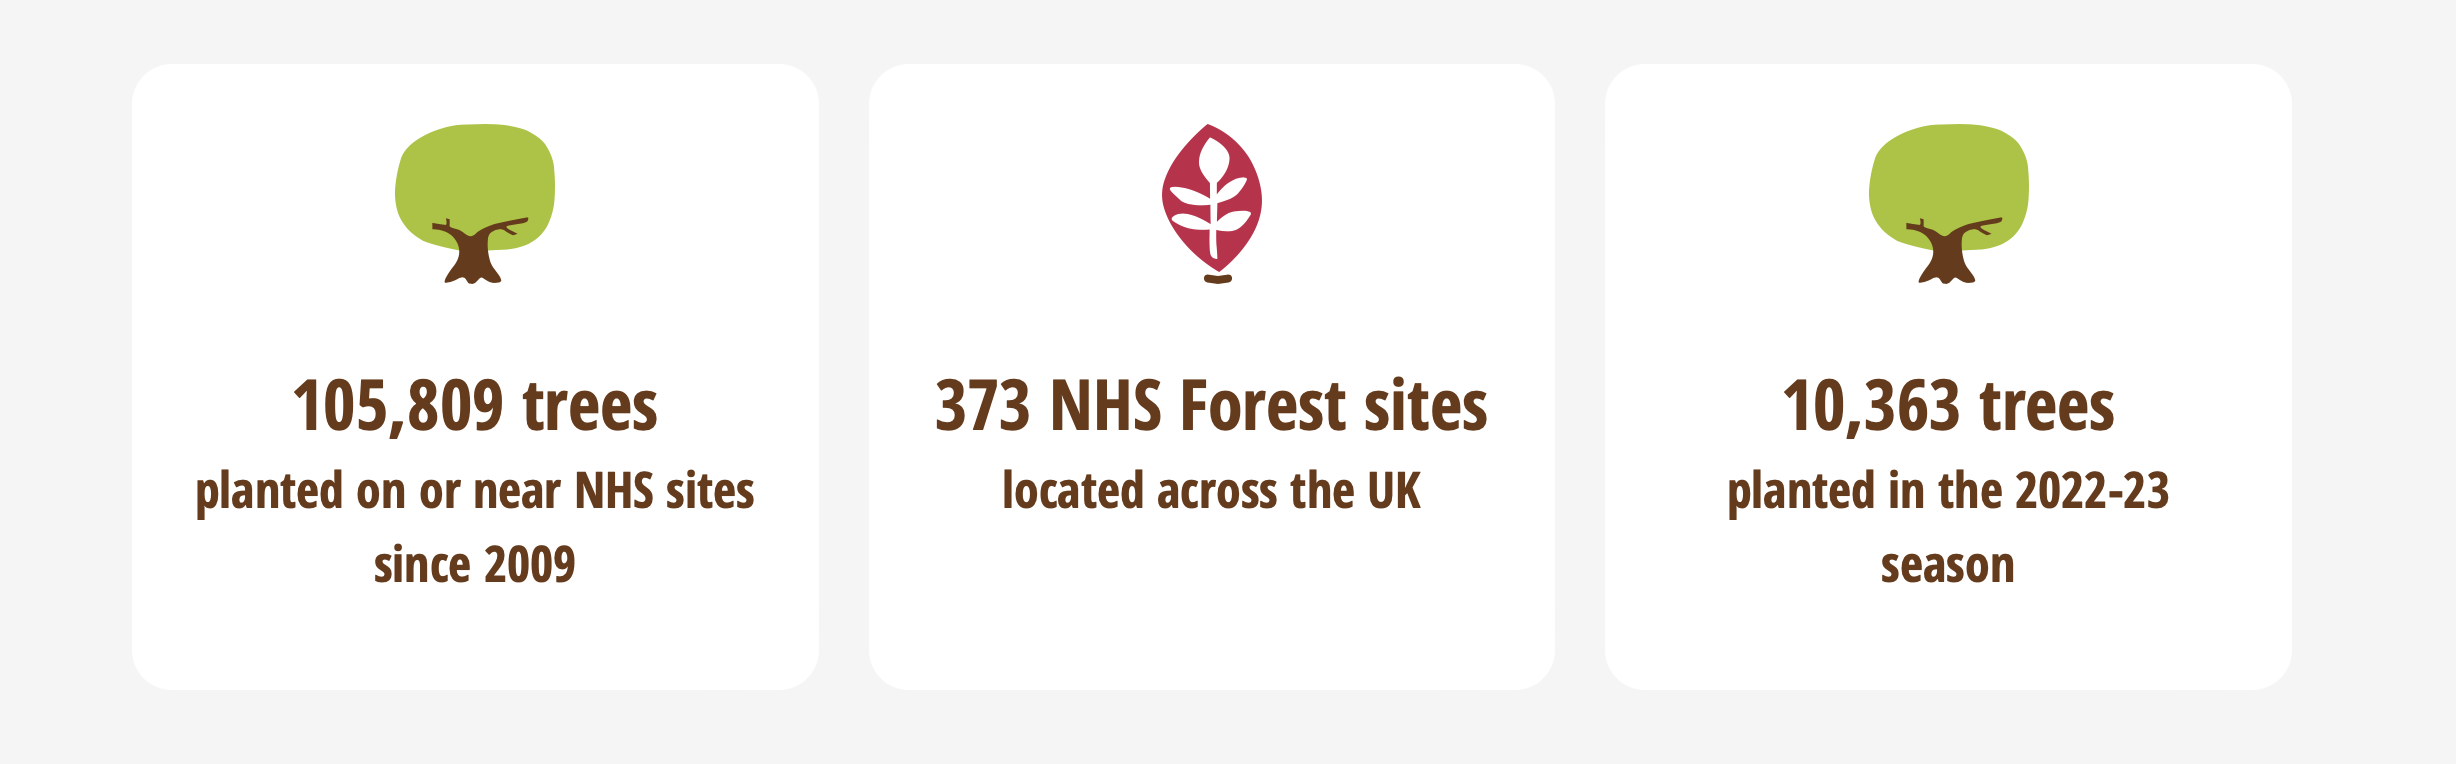 NHS Forest data from 2023